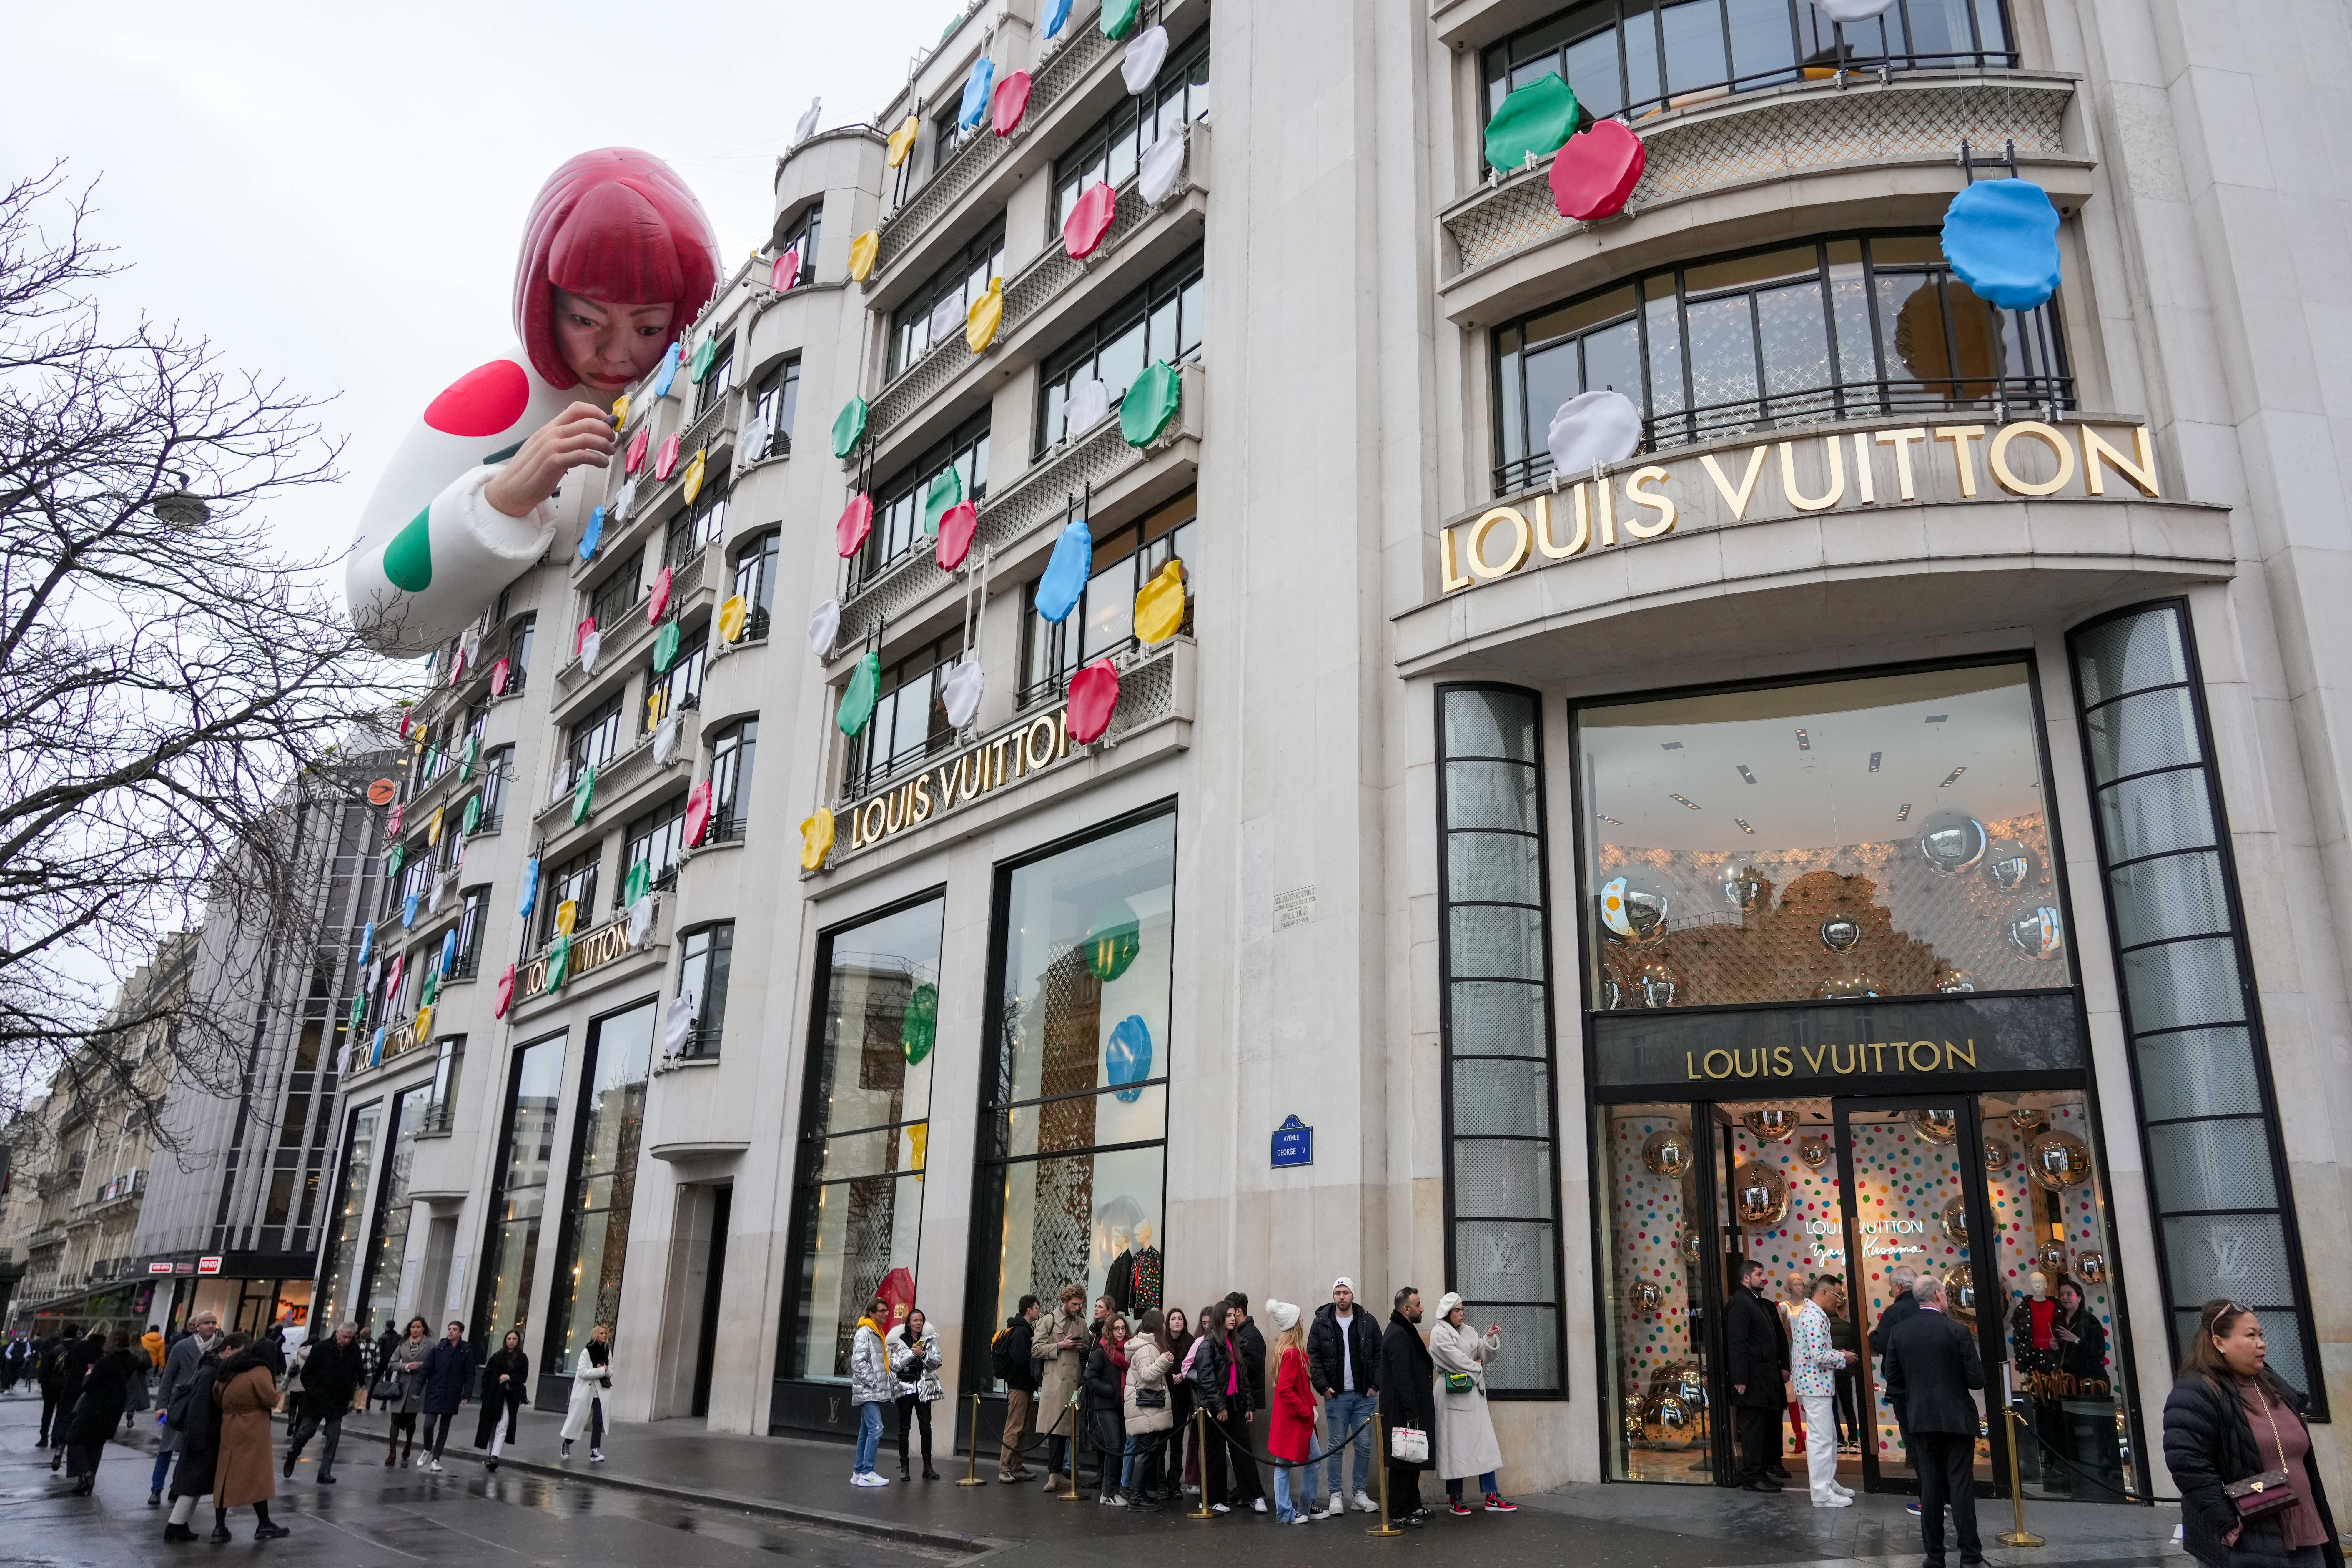 LVMH Becomes the New Luxury Goods Colossus Following the Full Acquisition  of Christian Dior - Smartweek